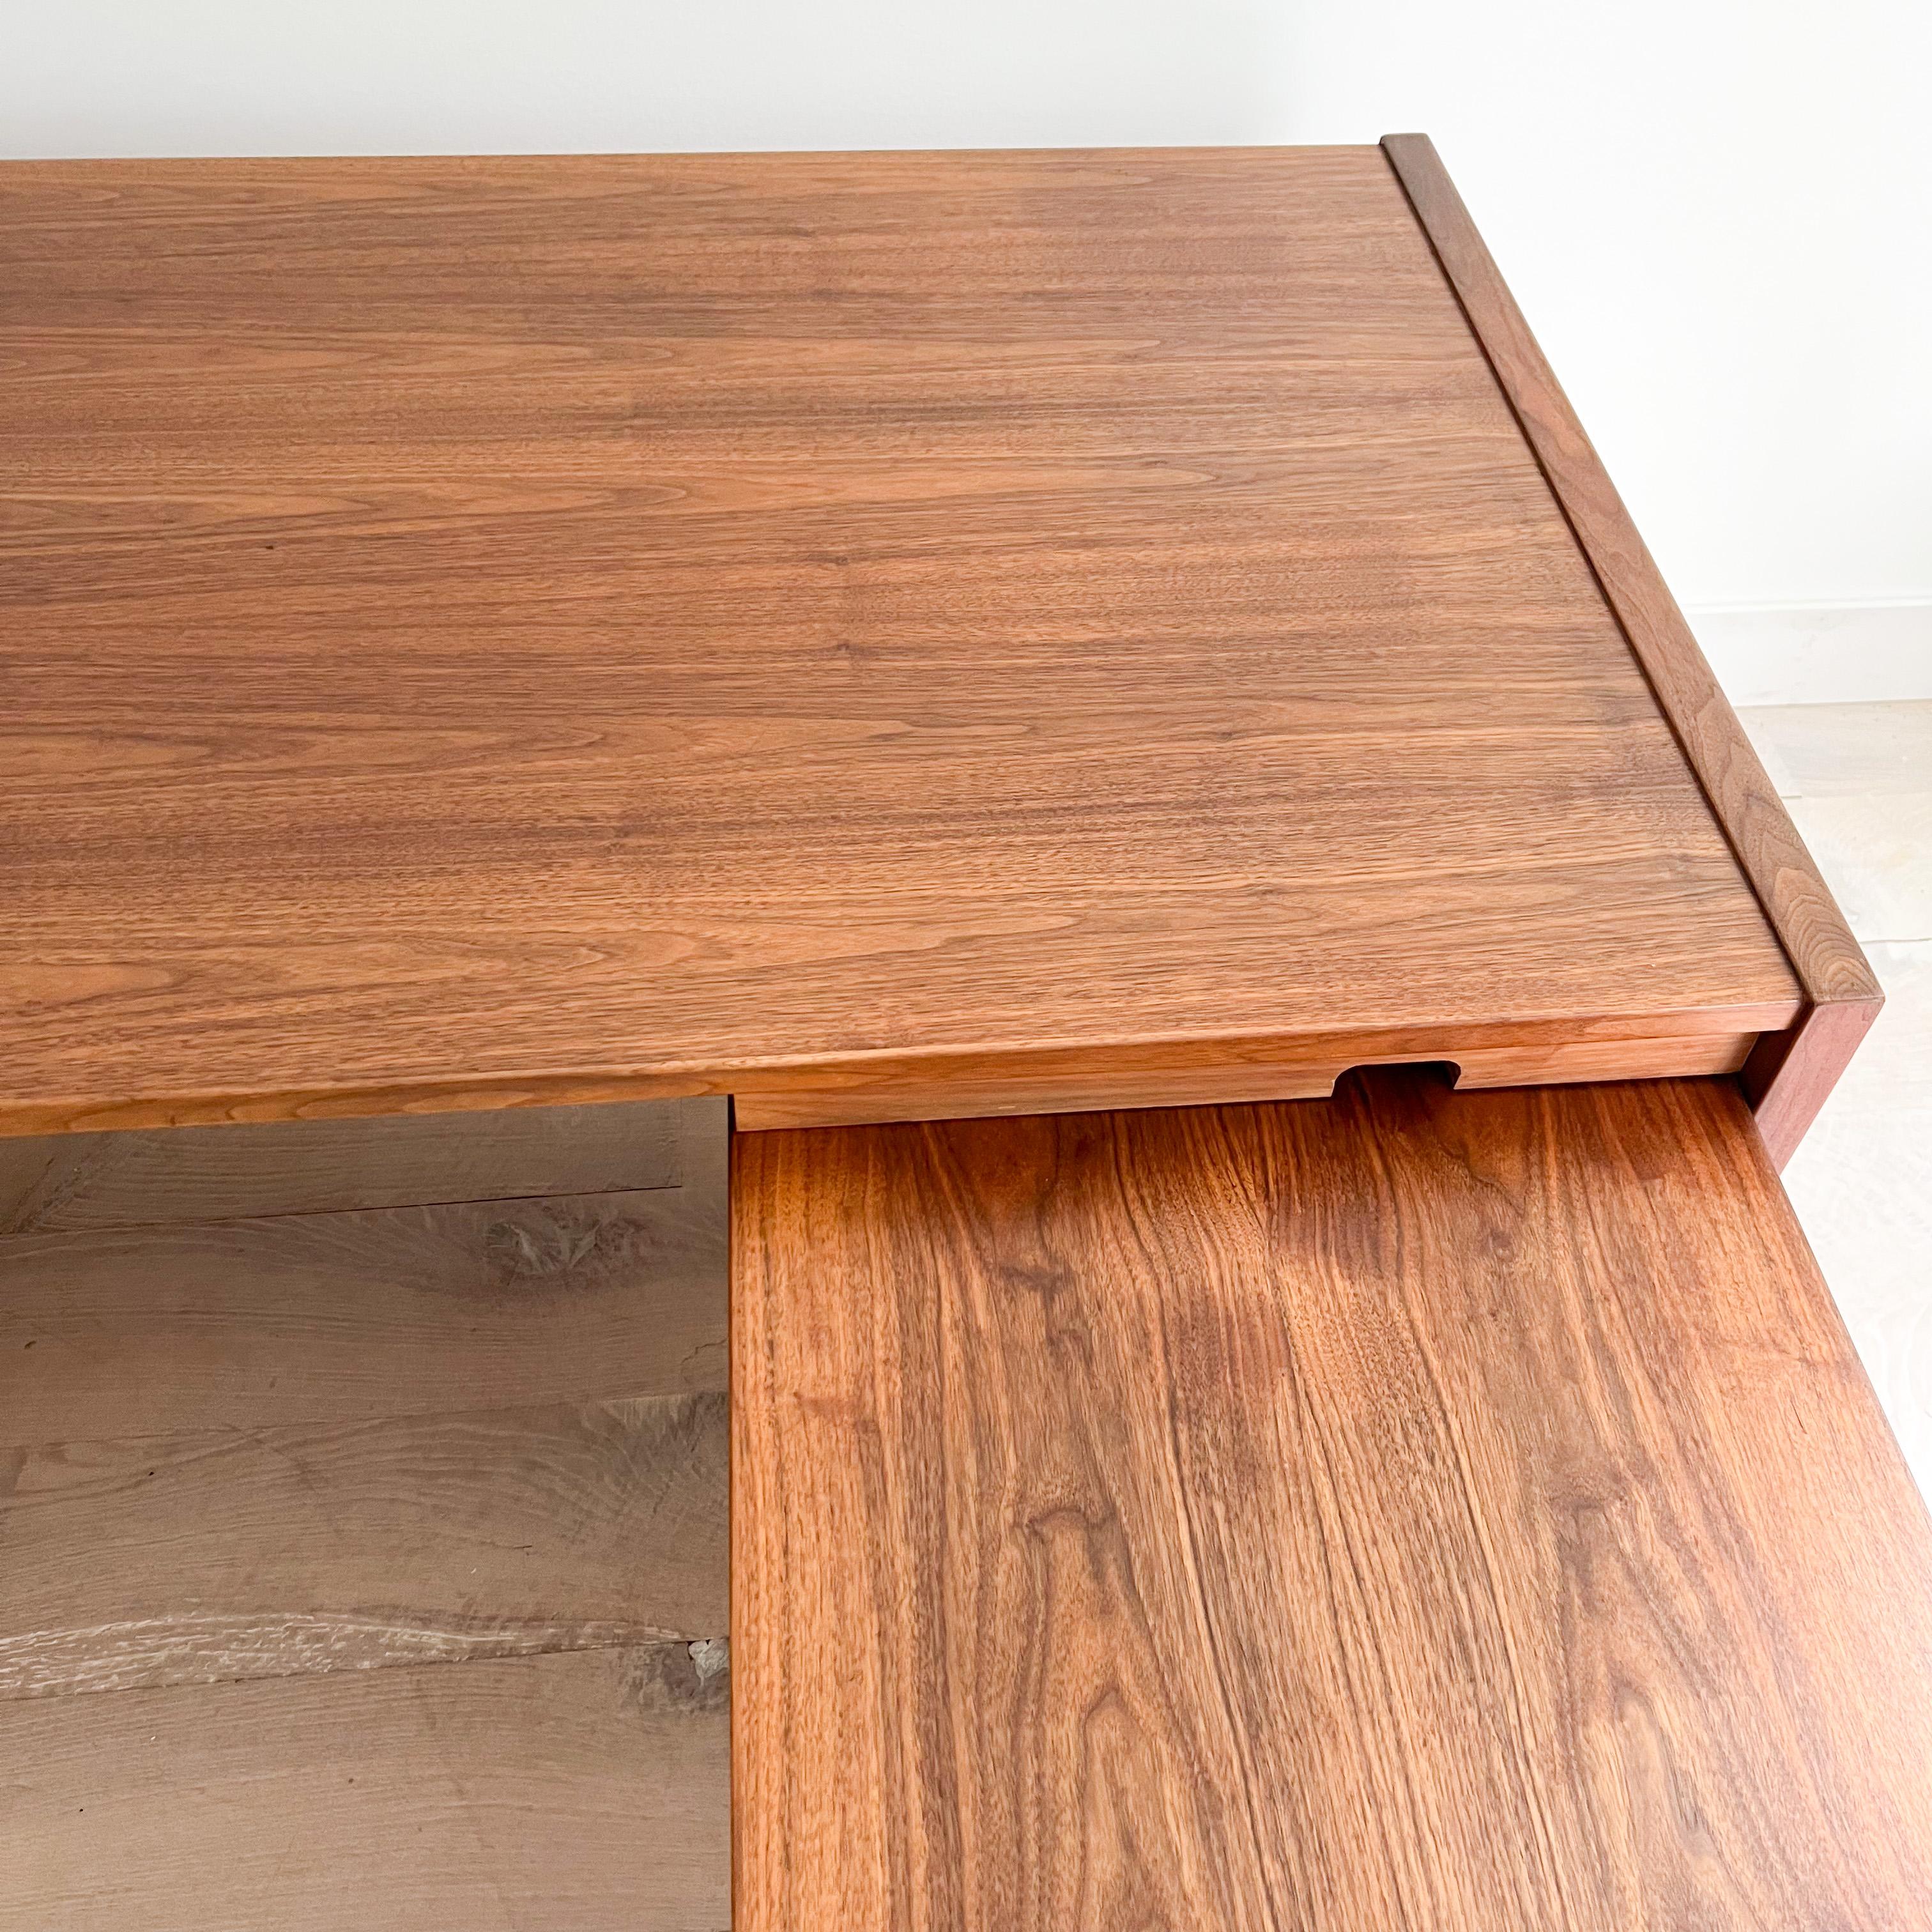 Mid century modern walnut desk with side return designed by Jens Risom. The tops have been sanded and restored. Some scuffing/scratching/small areas of veneer repair/fading from age appropriate wear. The return can be removed and the desk can be